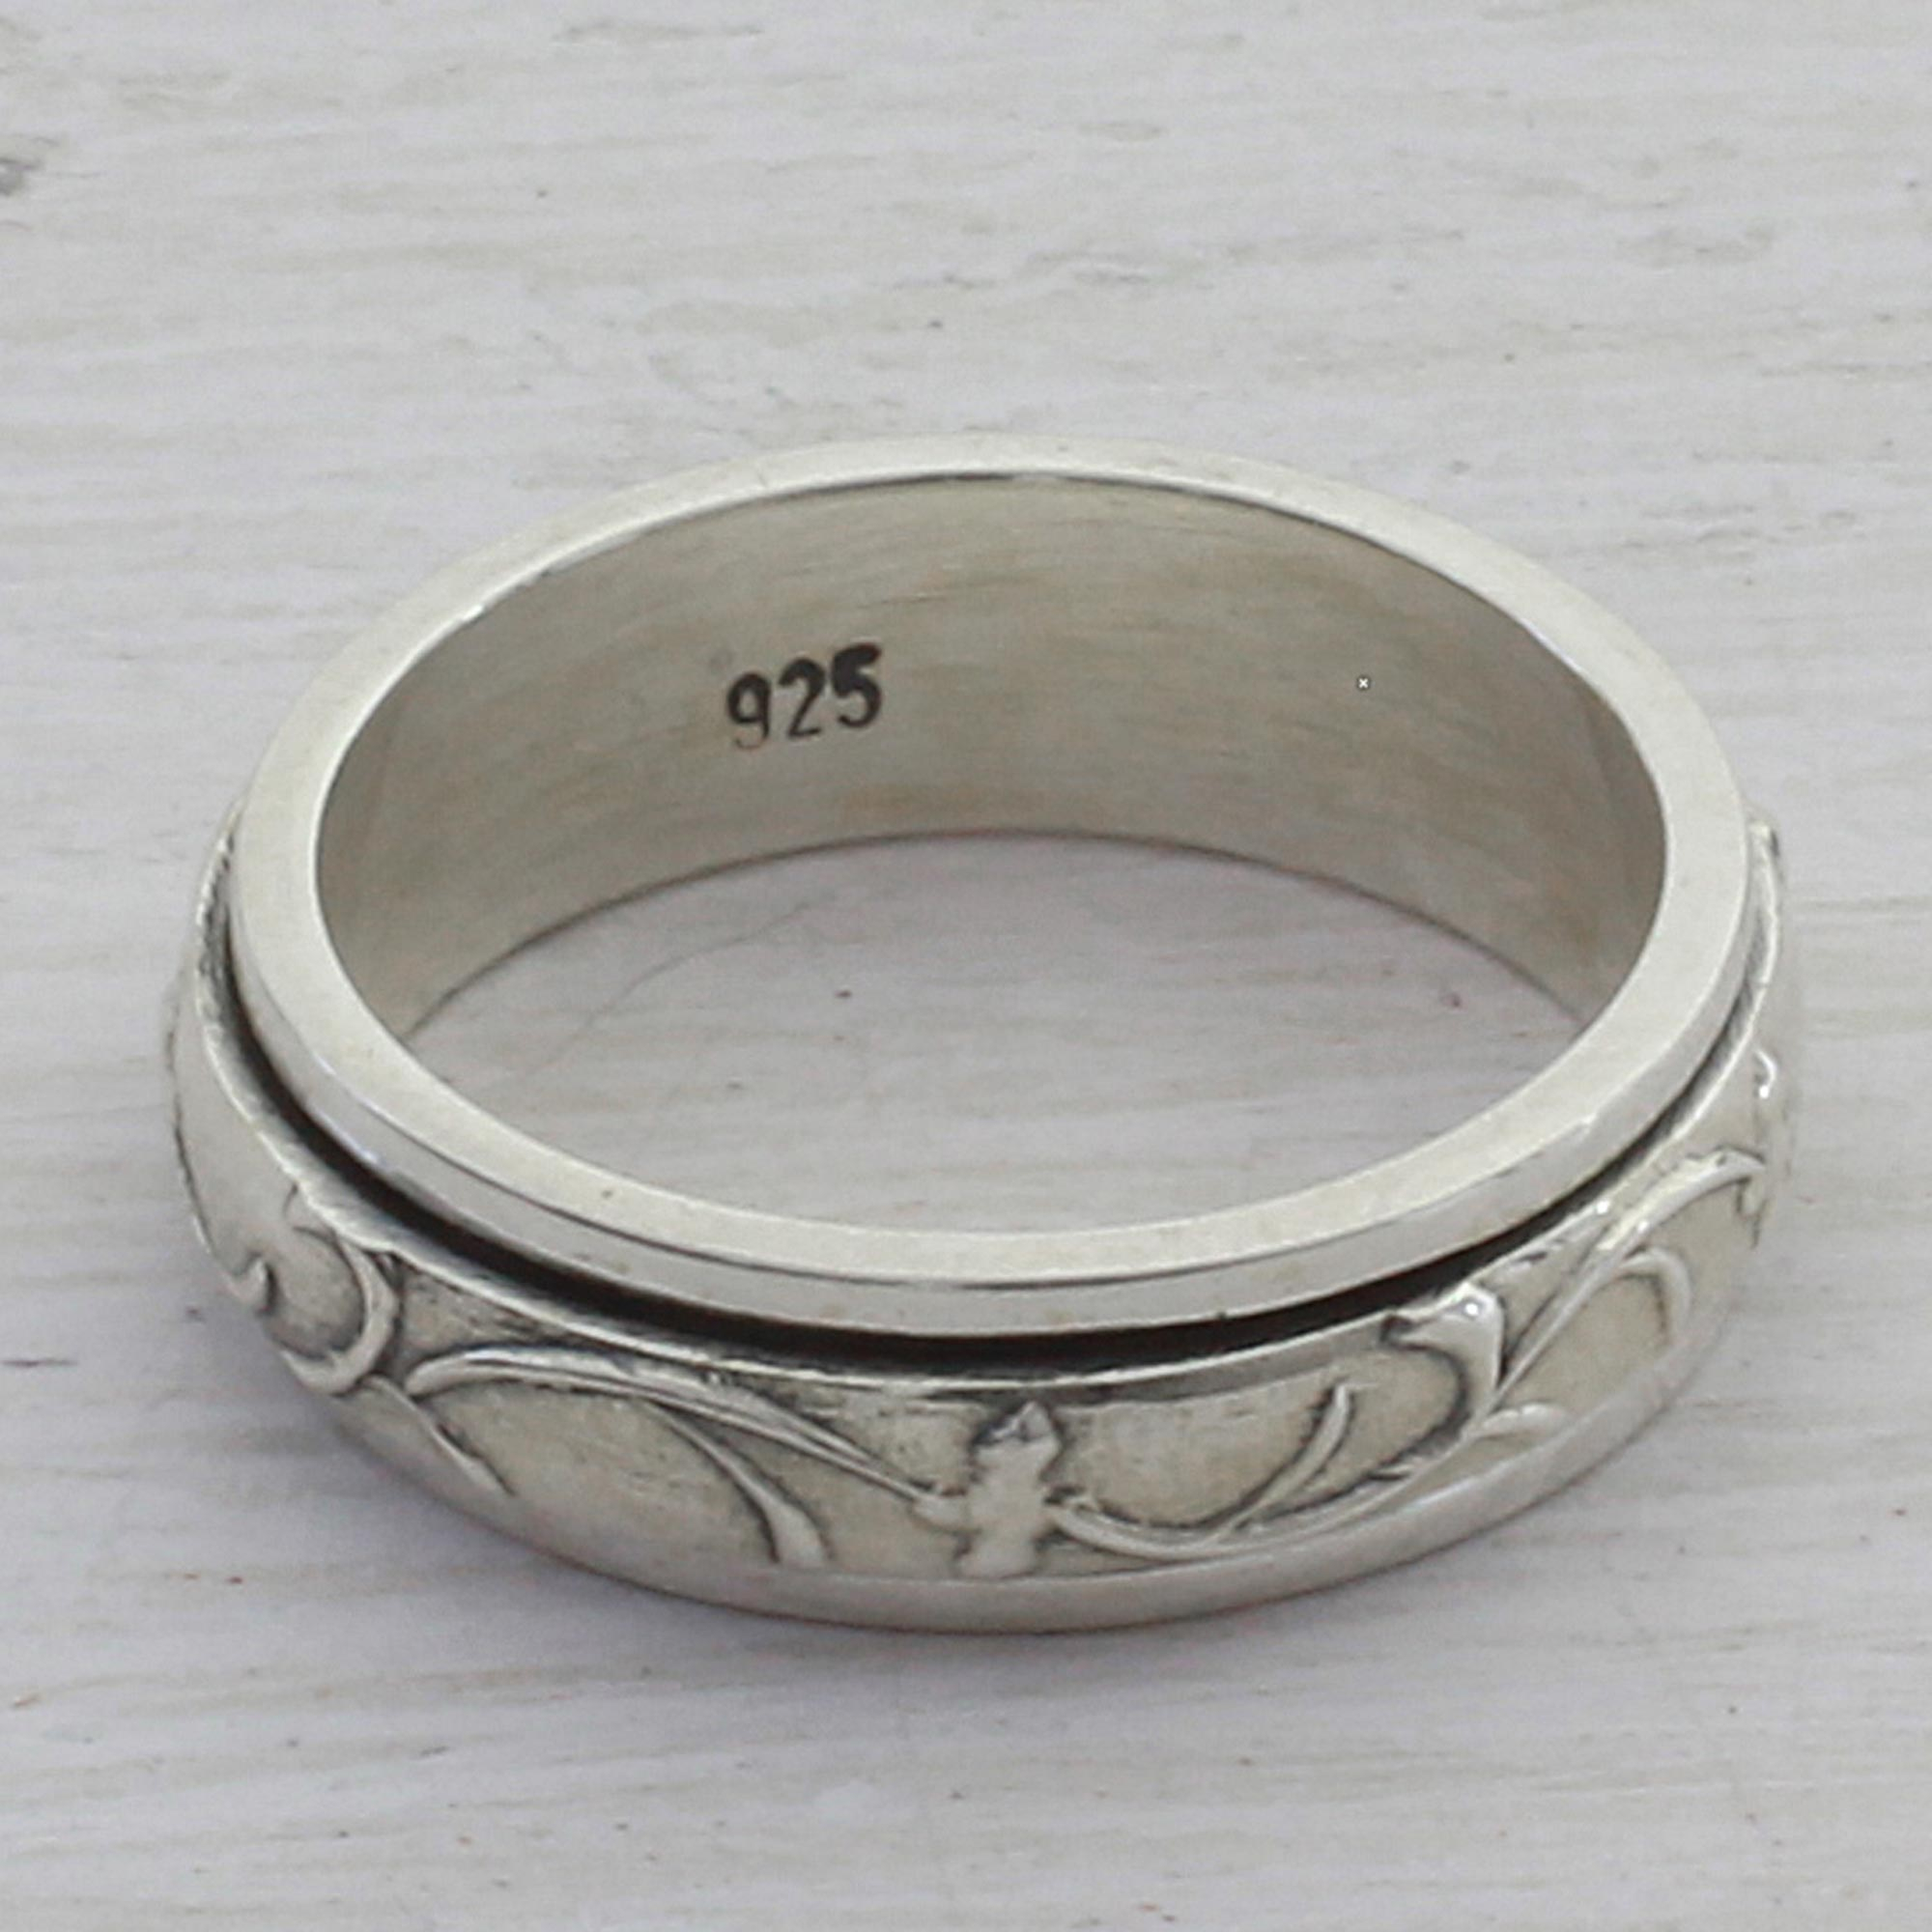 Artisan Crafted Sterling Silver Spinner Ring from India - Spinning ...